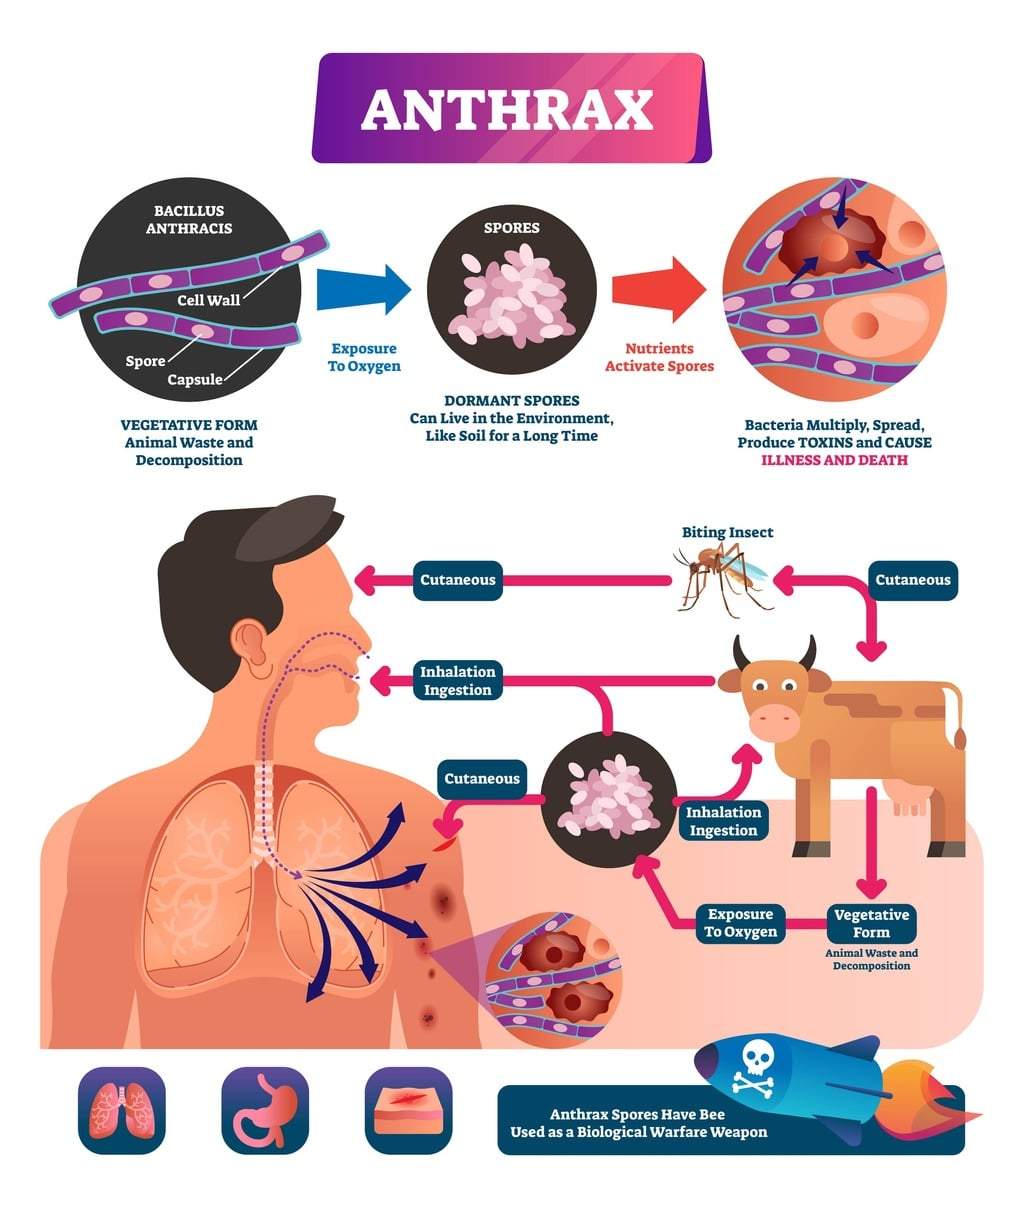 All About Anthrax exposure. medical infection disease cycle scheme. Bacterial illness used as biological warfare weapons. Diagram of spores exposure to oxygen produce toxins and cause death.